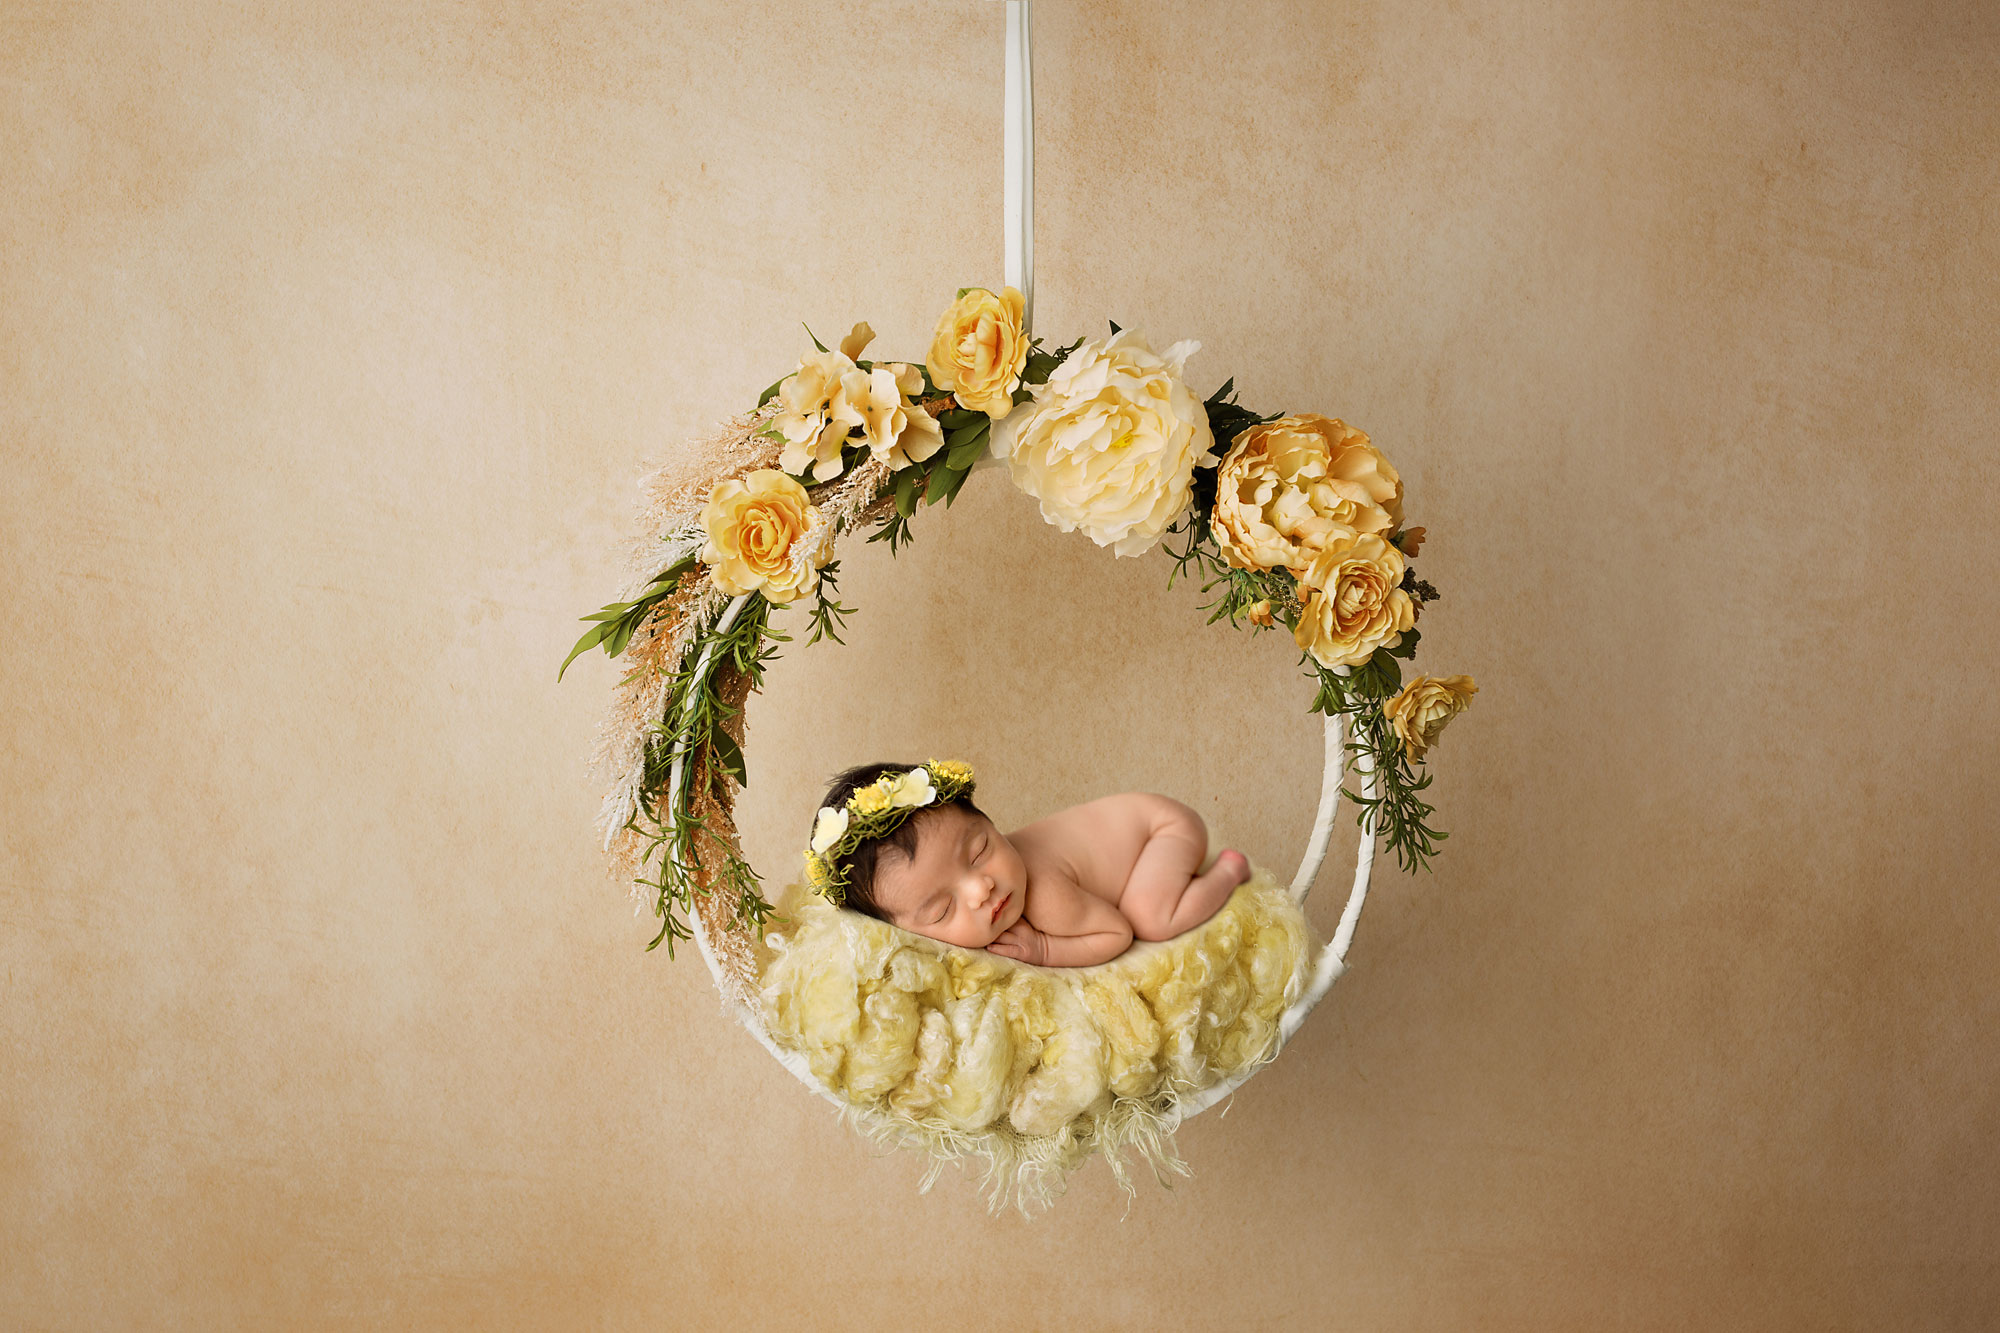 baby sleeping in a yellow floral wreath